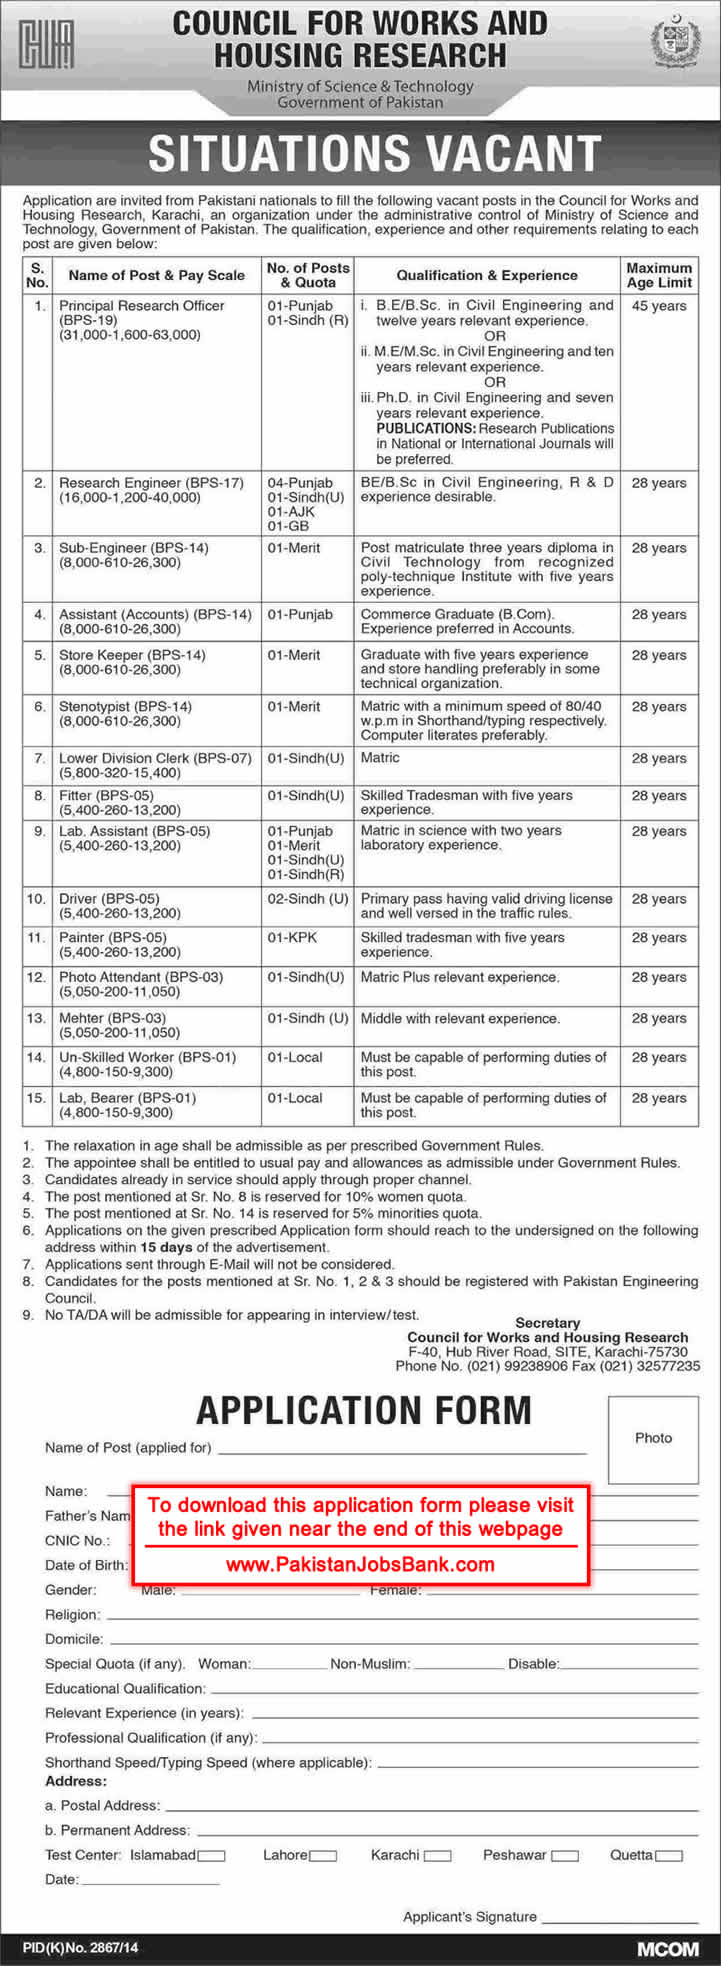 Council for Works and Housing Research Karachi Jobs 2015 March / April Application Form Download